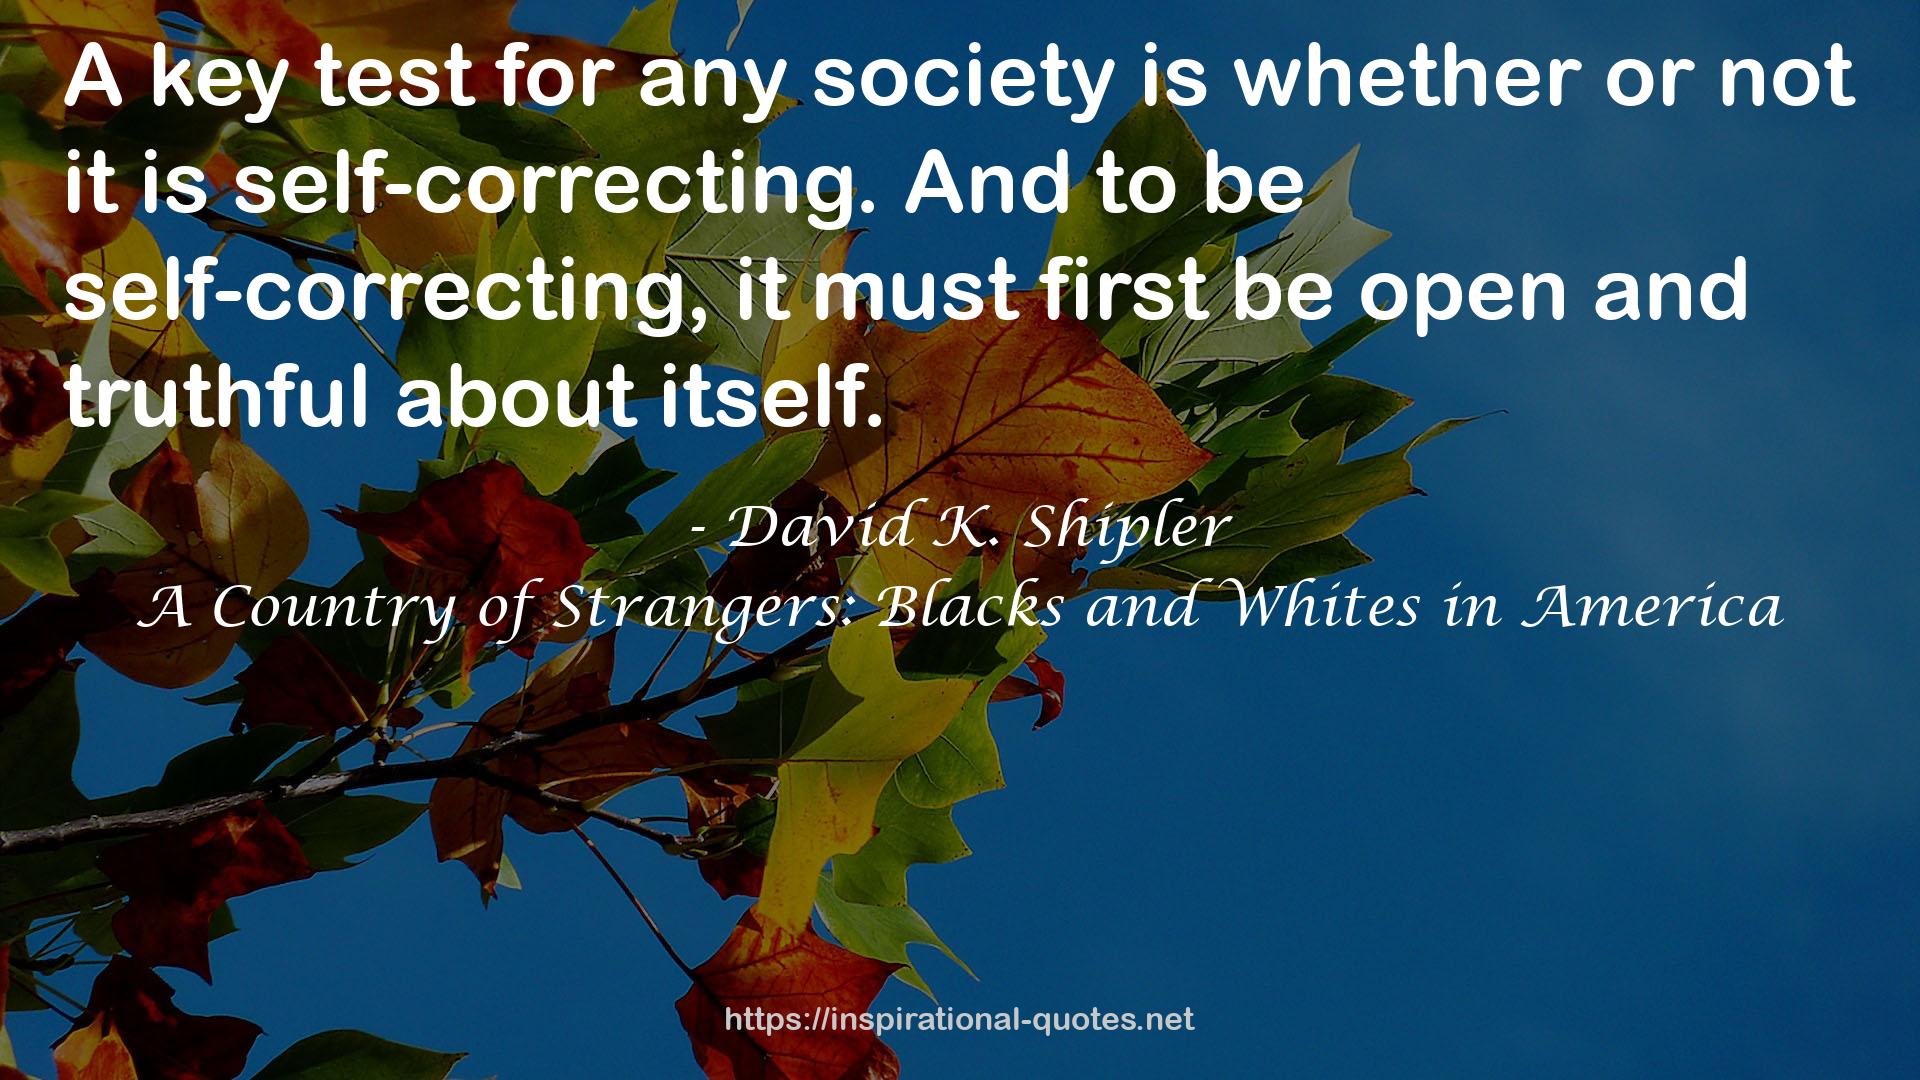 A Country of Strangers: Blacks and Whites in America QUOTES